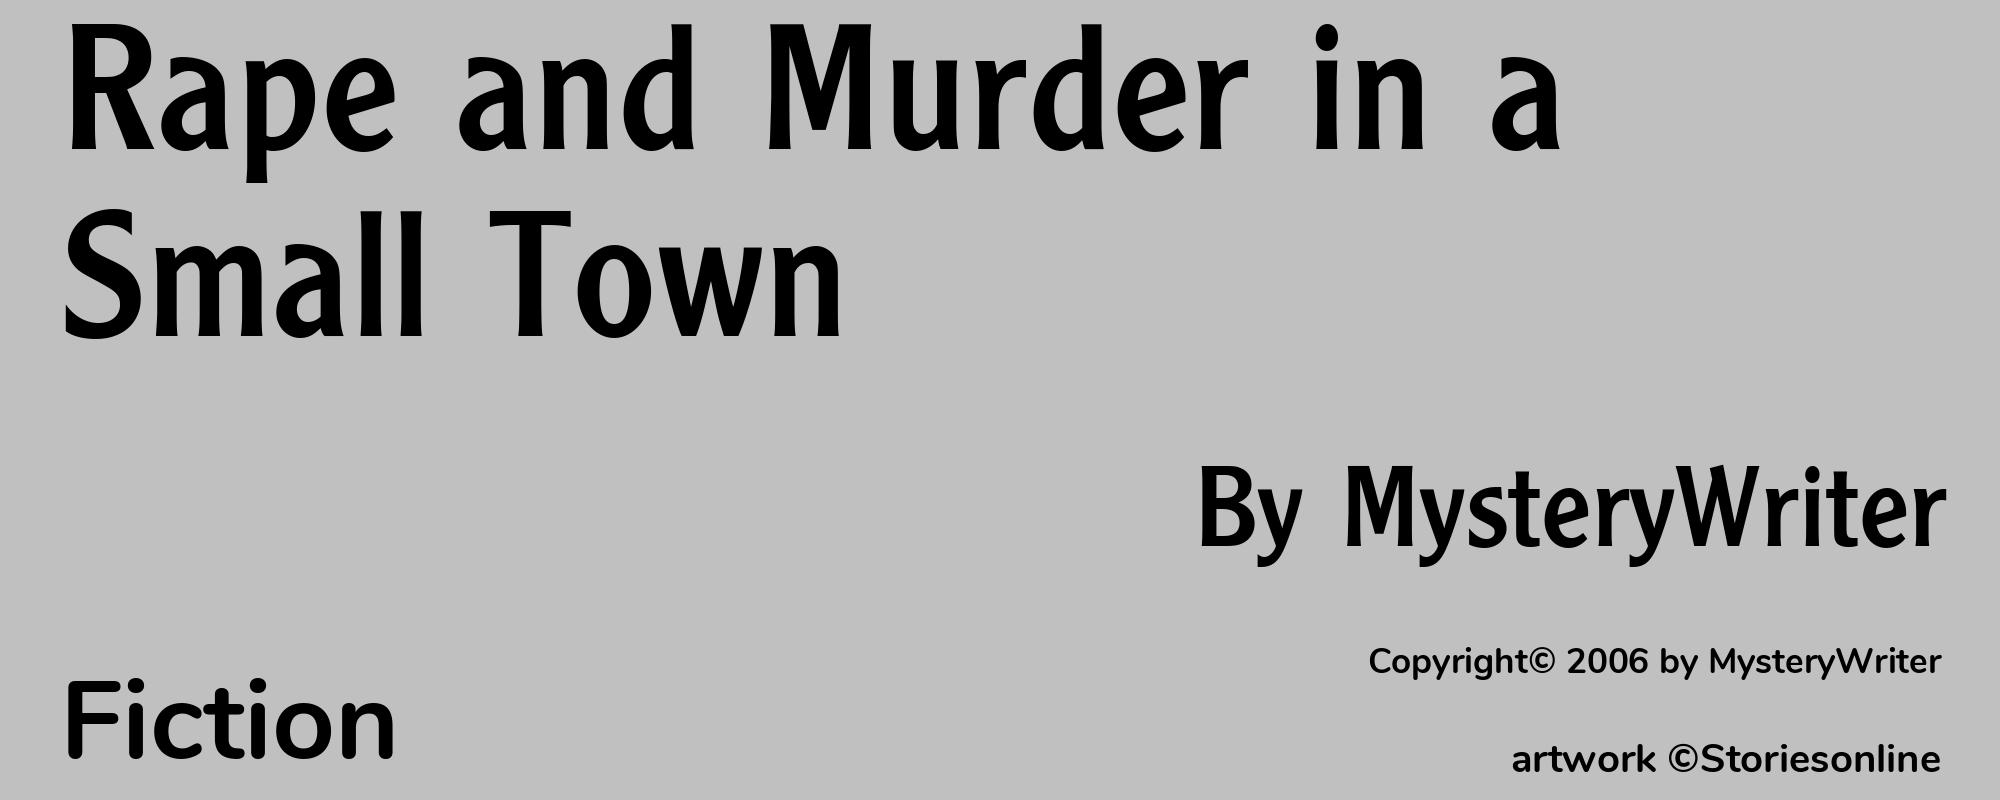 Rape and Murder in a Small Town - Cover